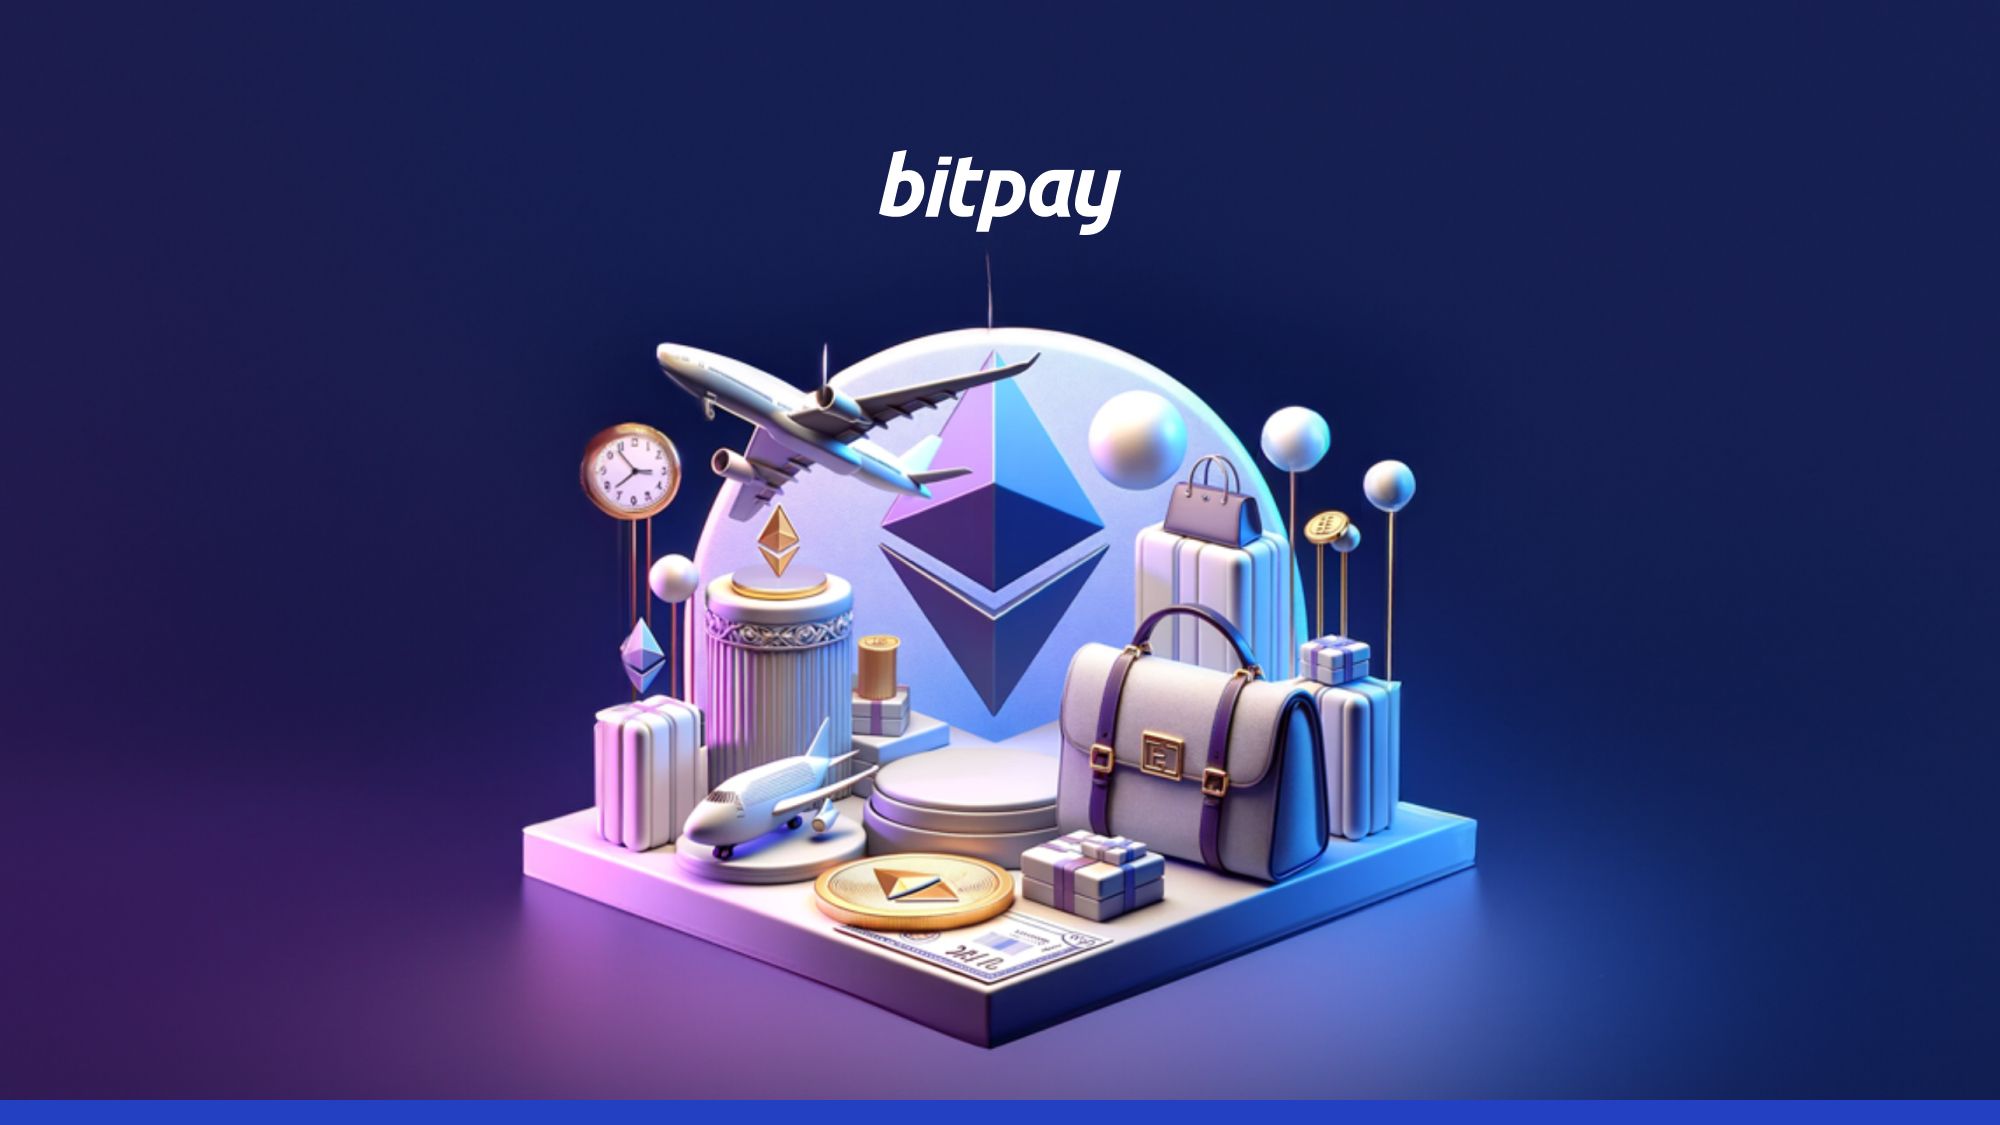 What Can You Buy With Ethereum? Explore Purchases with Ethereum: A Guide – The Crypto Basic